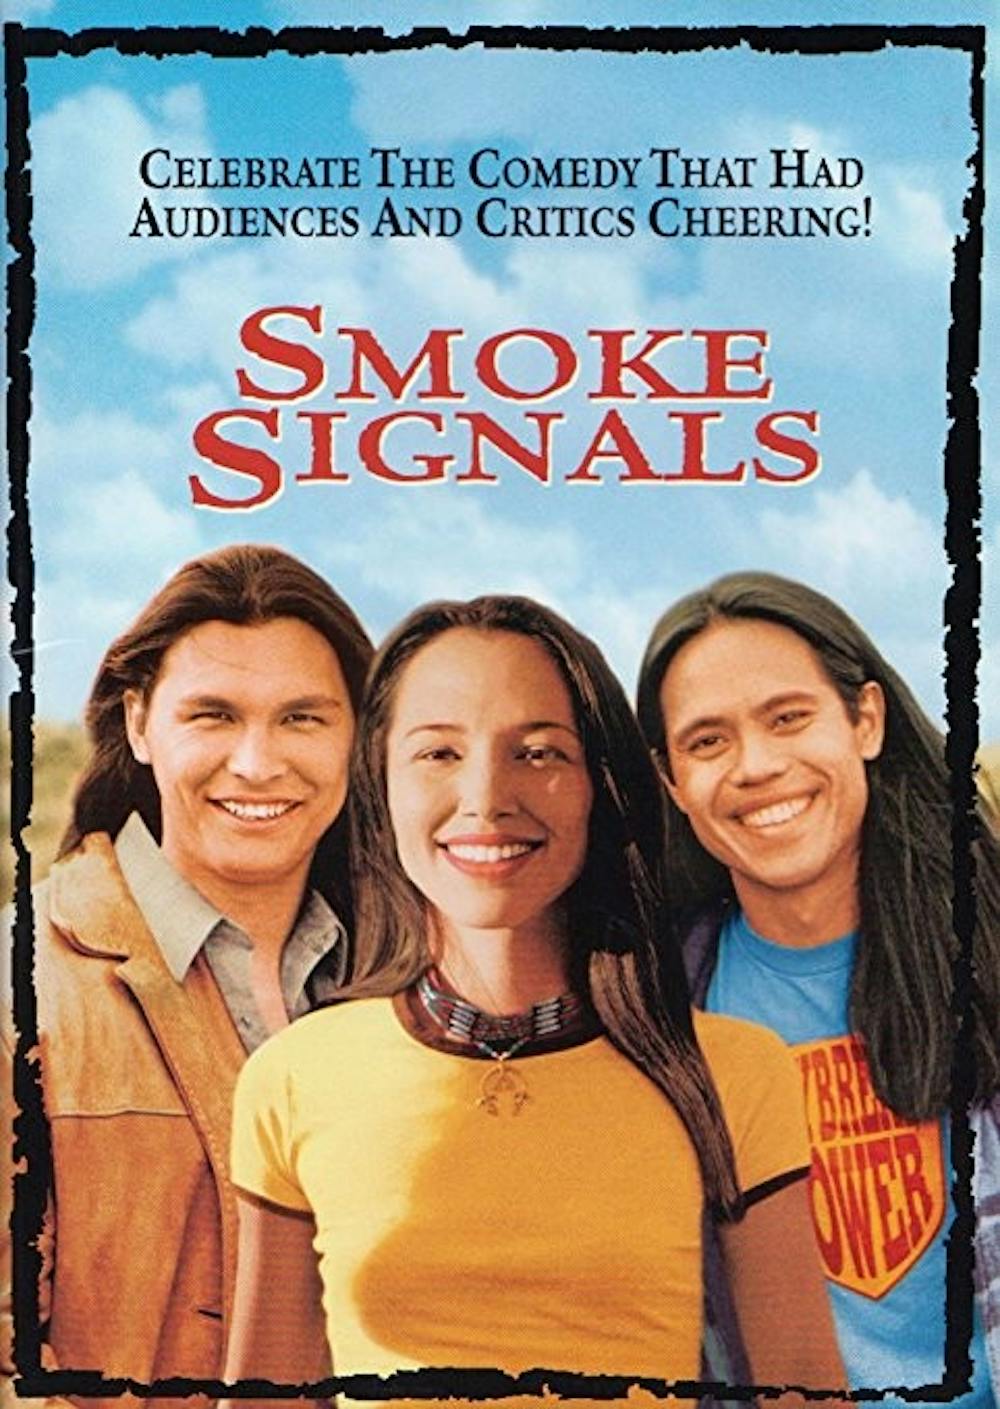 Eastern Michigan University's Center for Multicultural Affairs shows 'Smoke Signals'